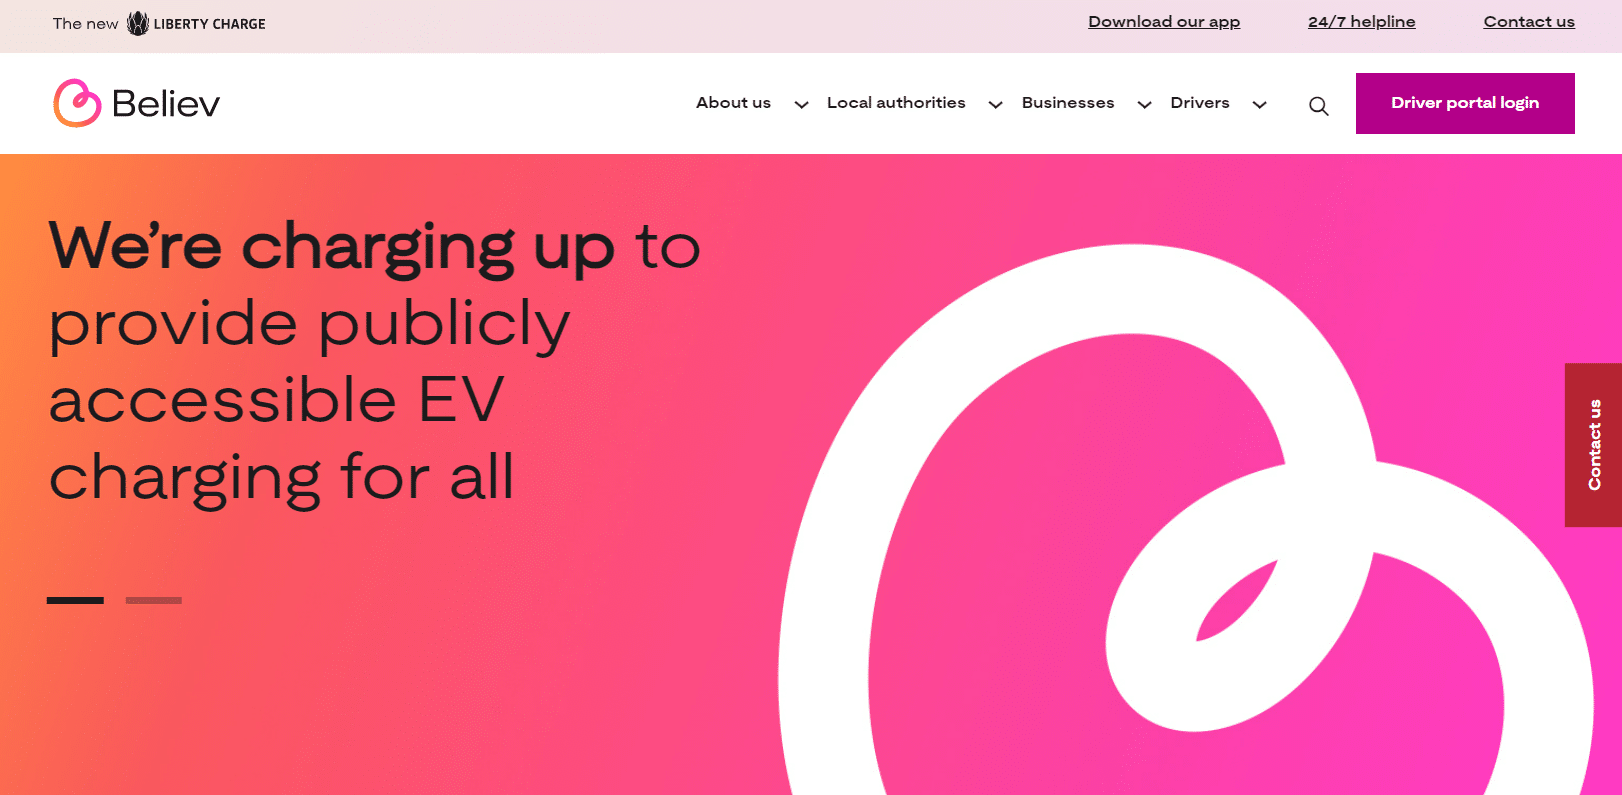 Liberty Charge Rebrands to Believ